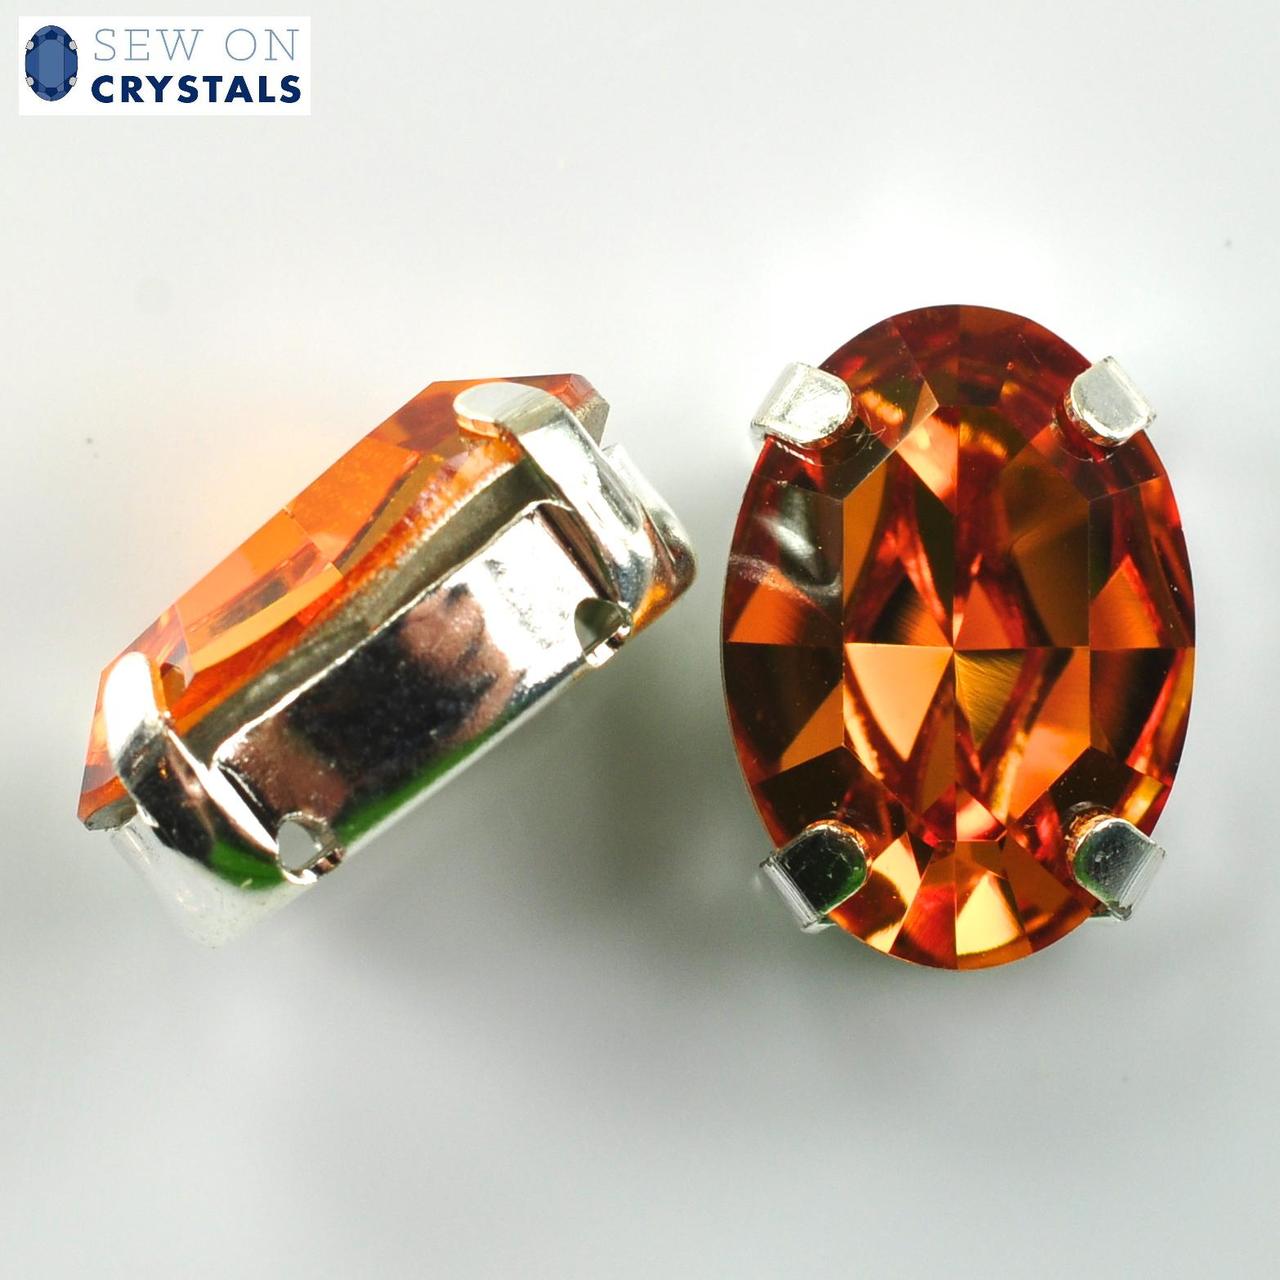 Topaz 14x10mm Oval Sew On Crystals - 2 Pieces